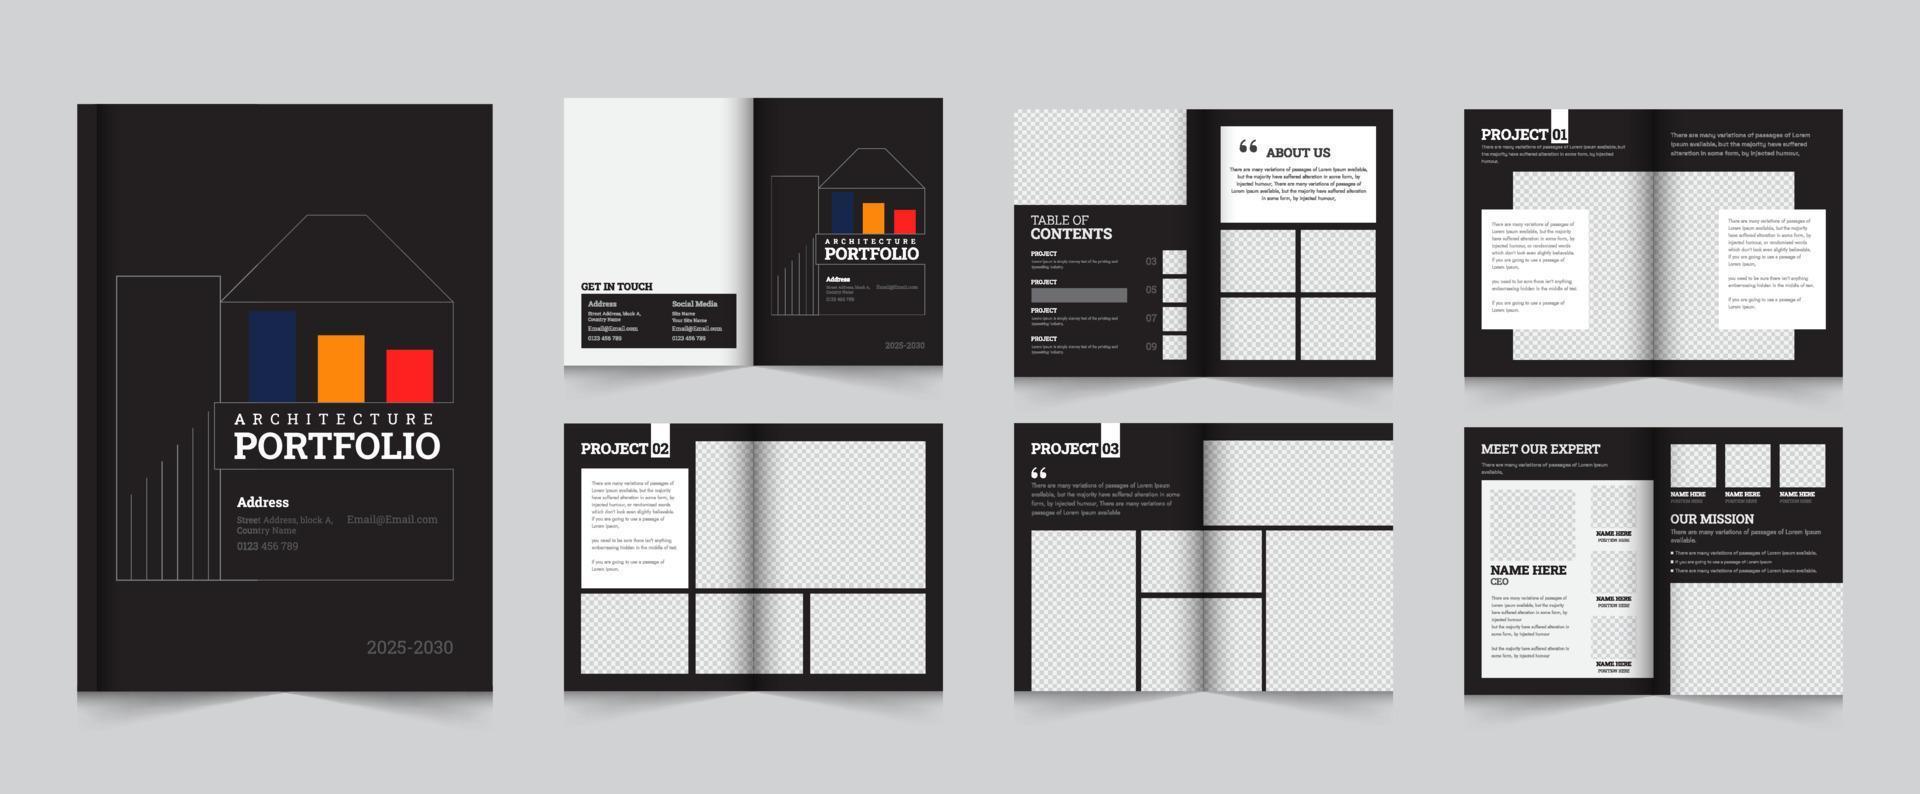 architectuur portefeuille of portefeuille brochure lay-out sjabloon ontwerp vector